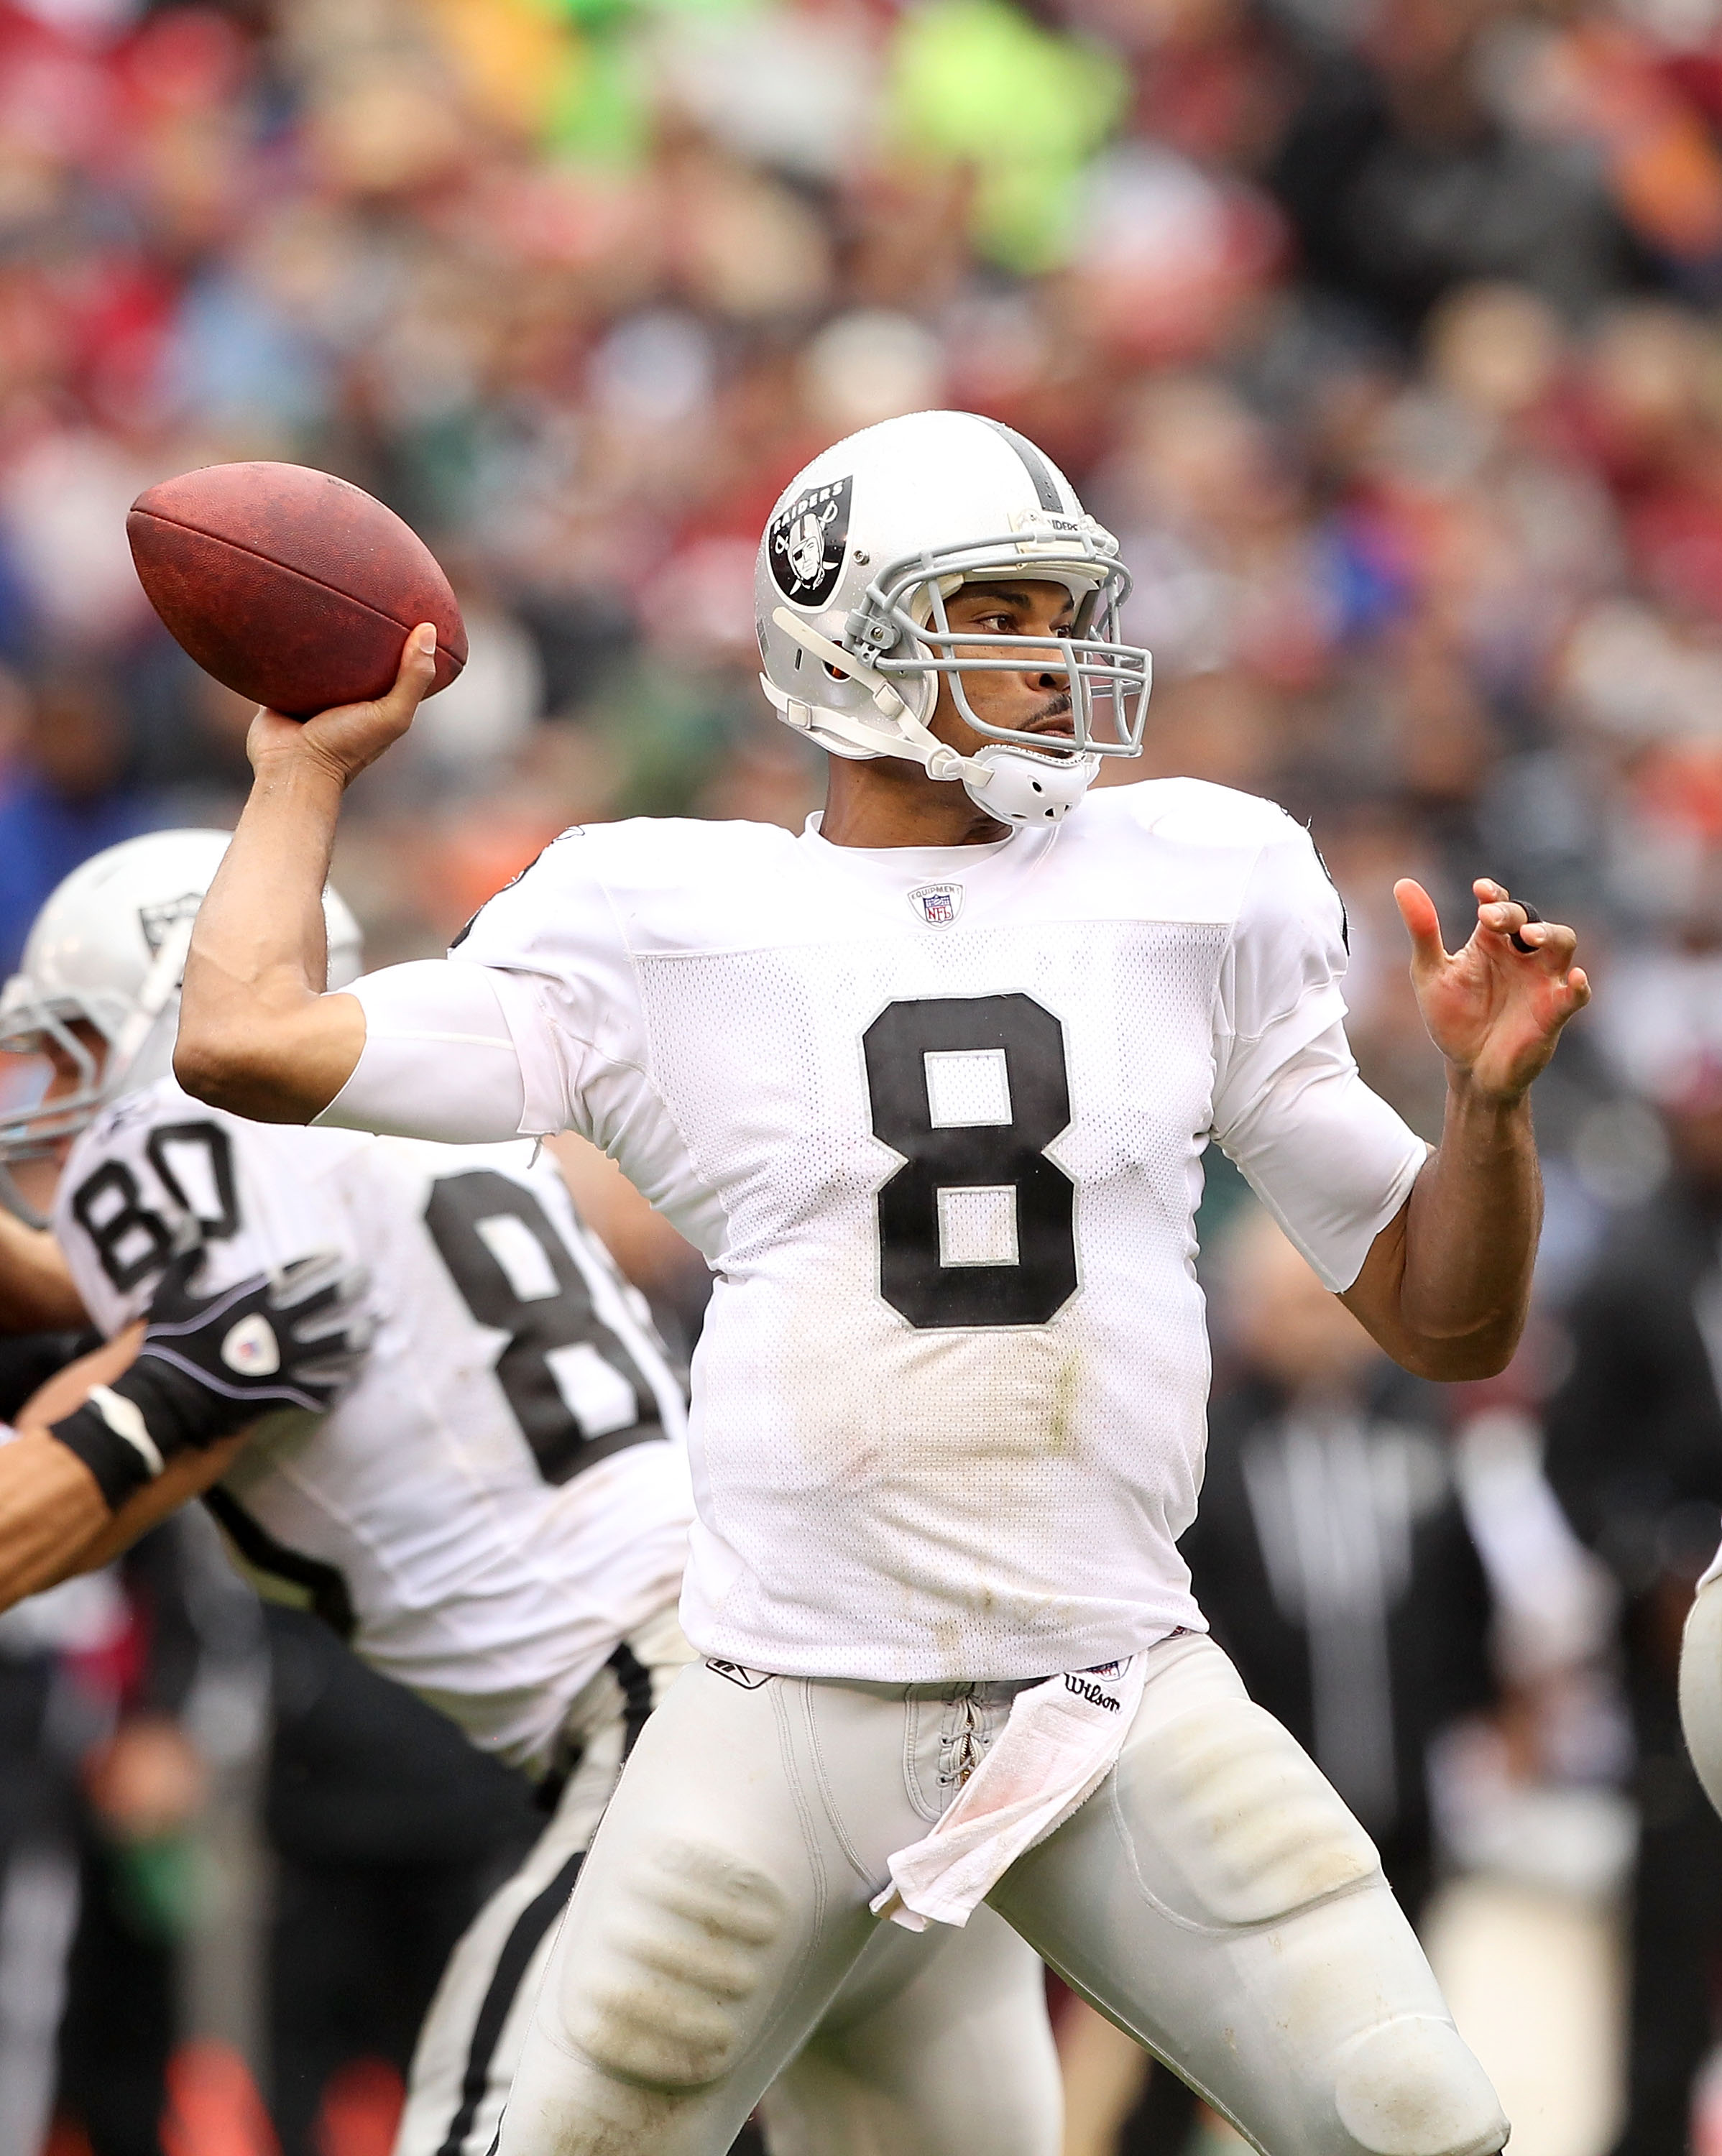 SAN FRANCISCO - OCTOBER 17:  Jason Campbell #8 of the Oakland Raiders in action against the San Francisco 49ers at Candlestick Park on October 17, 2010 in San Francisco, California.  (Photo by Ezra Shaw/Getty Images)